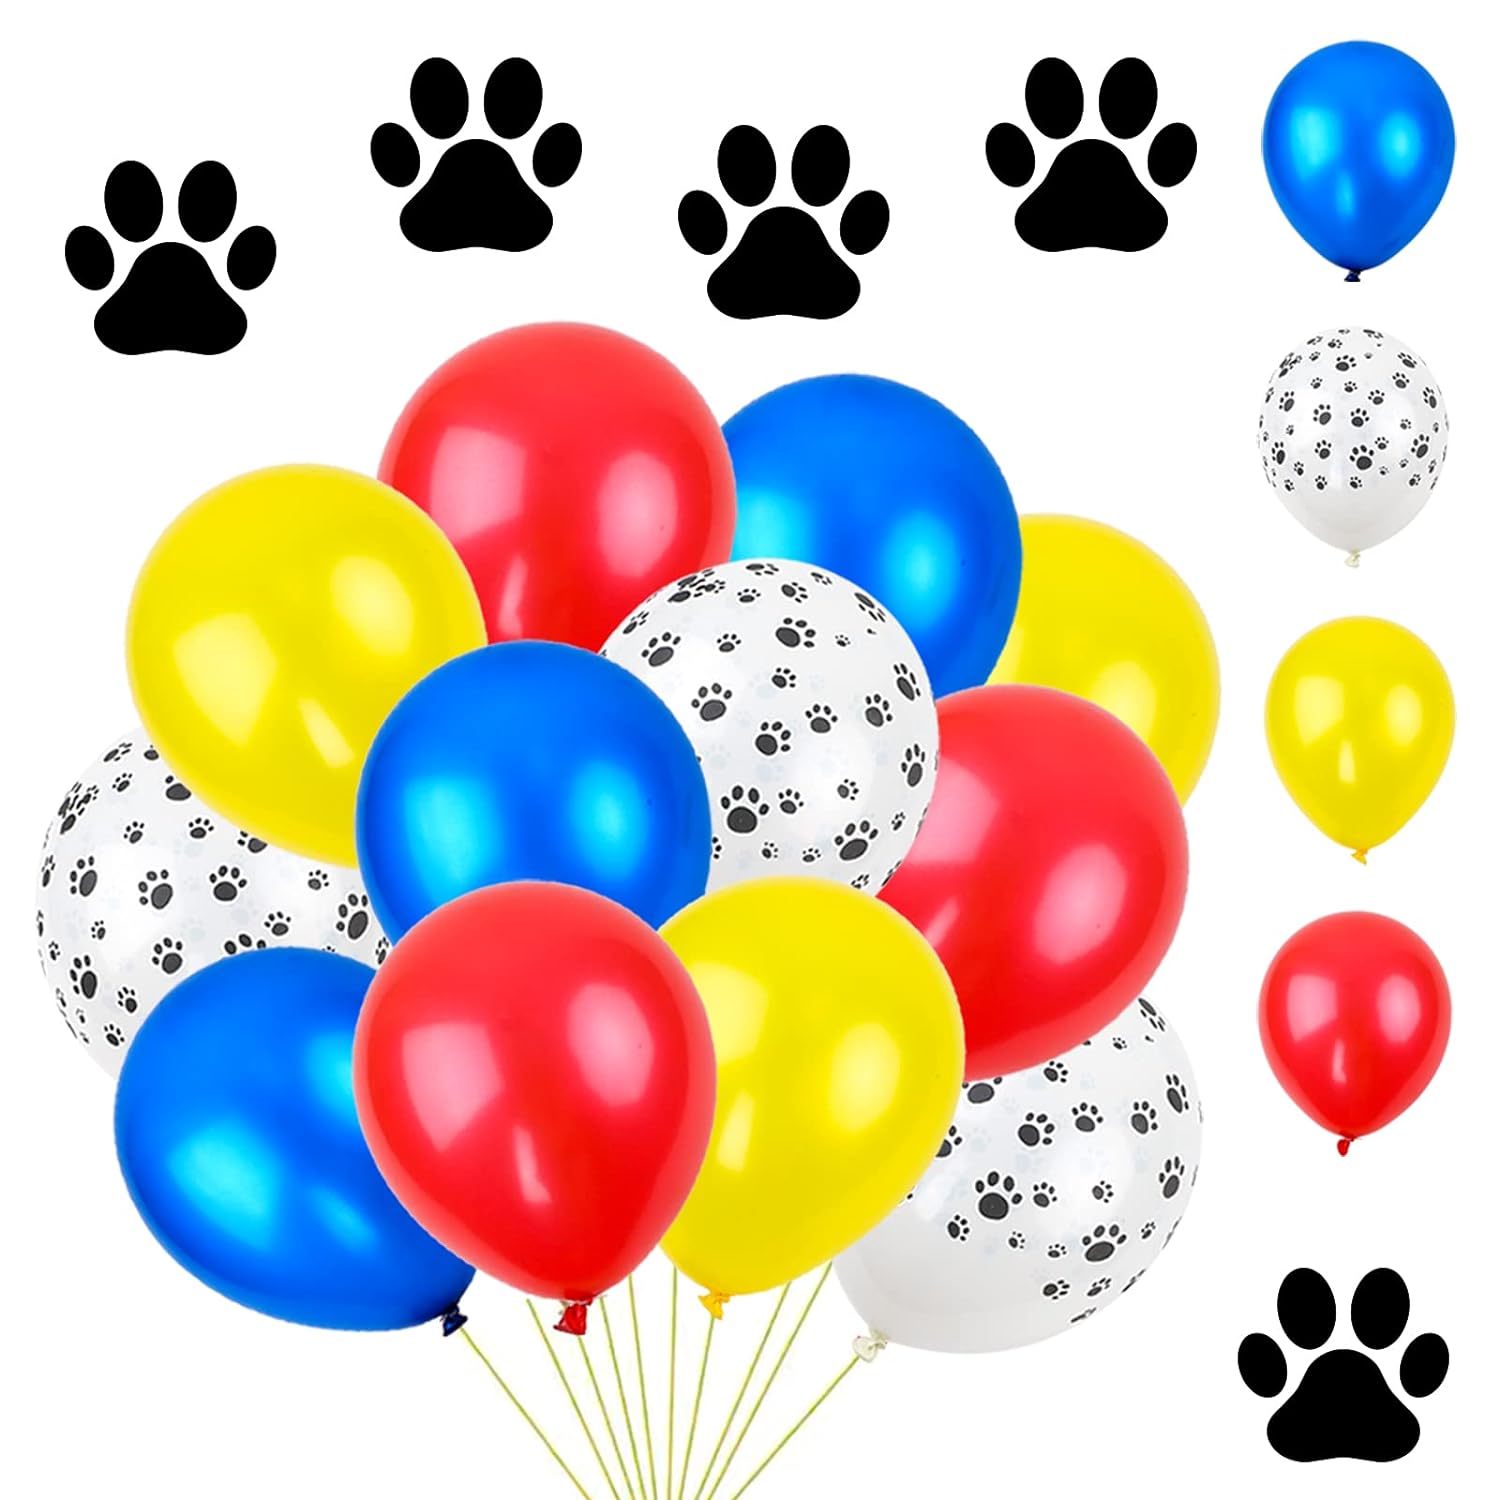 Great Choice Products 36 Colorful Latex Dog Paw Print Balloons (Red, Yellow, Blue, Dog Paw), Paw Party Decorations, Activities, Classroom, Birthday…